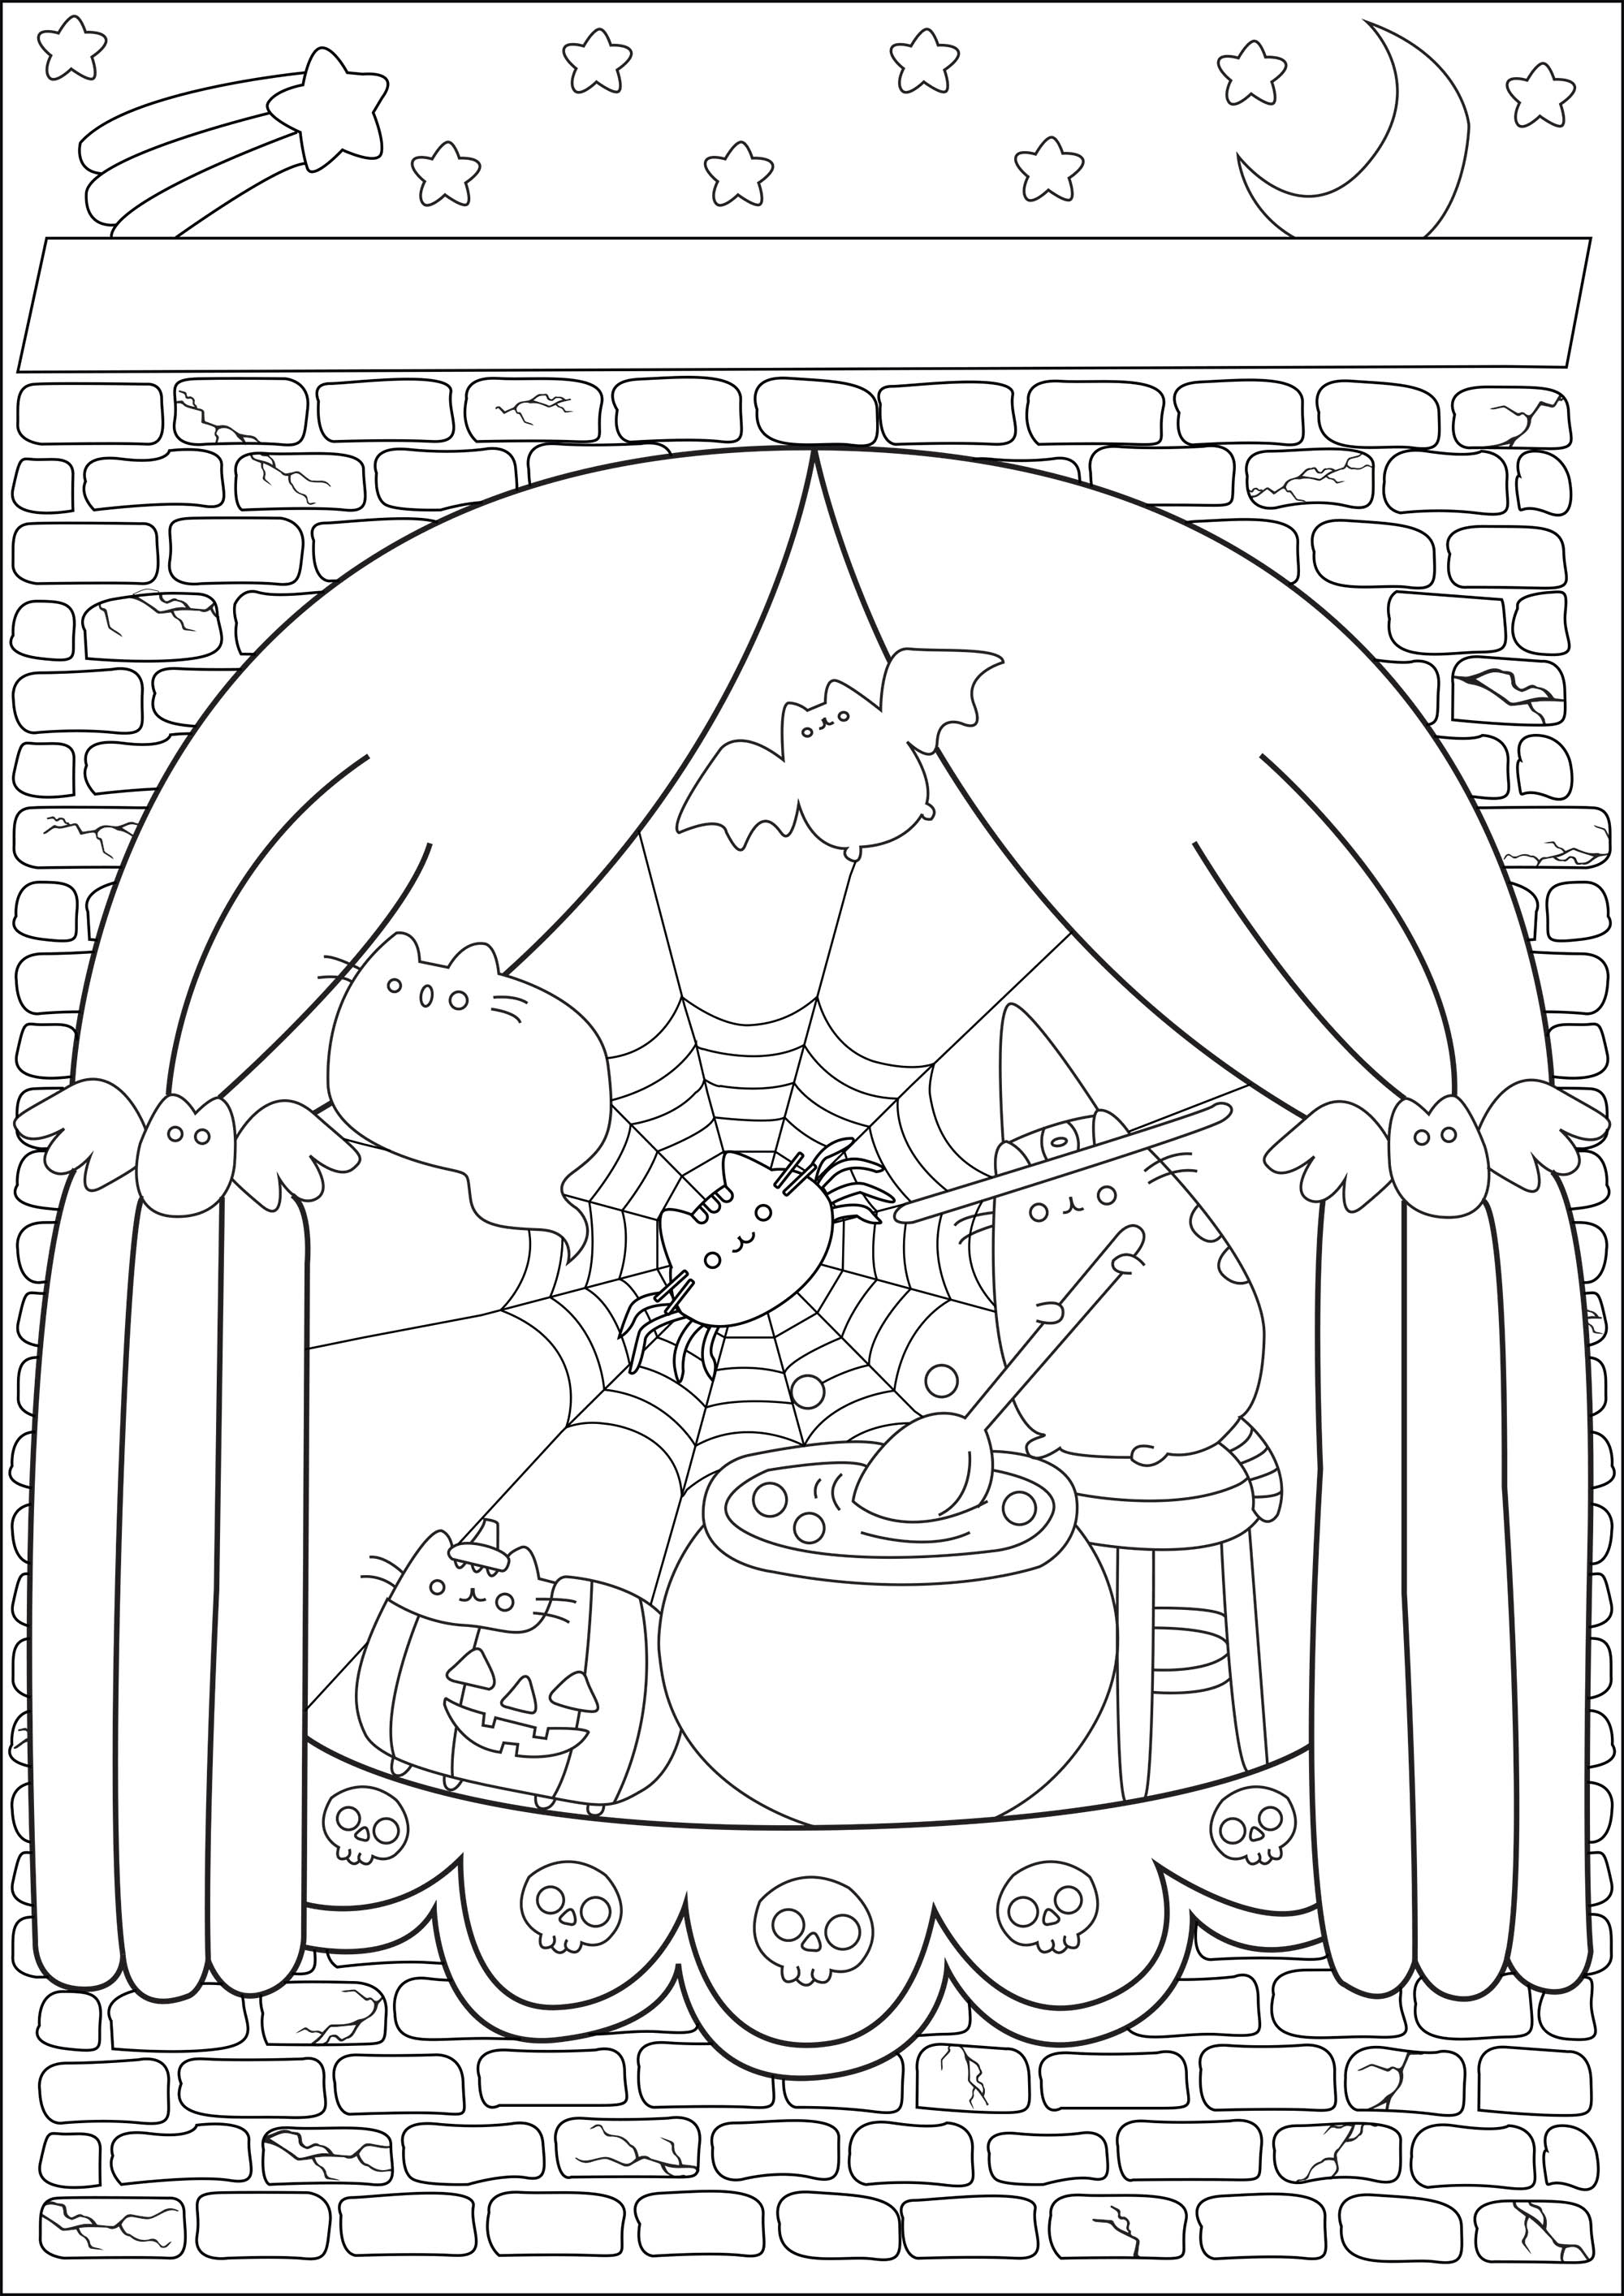 Mansion Coloring Pages Pusheen Halloween Witch Halloween Adult Coloring Pages